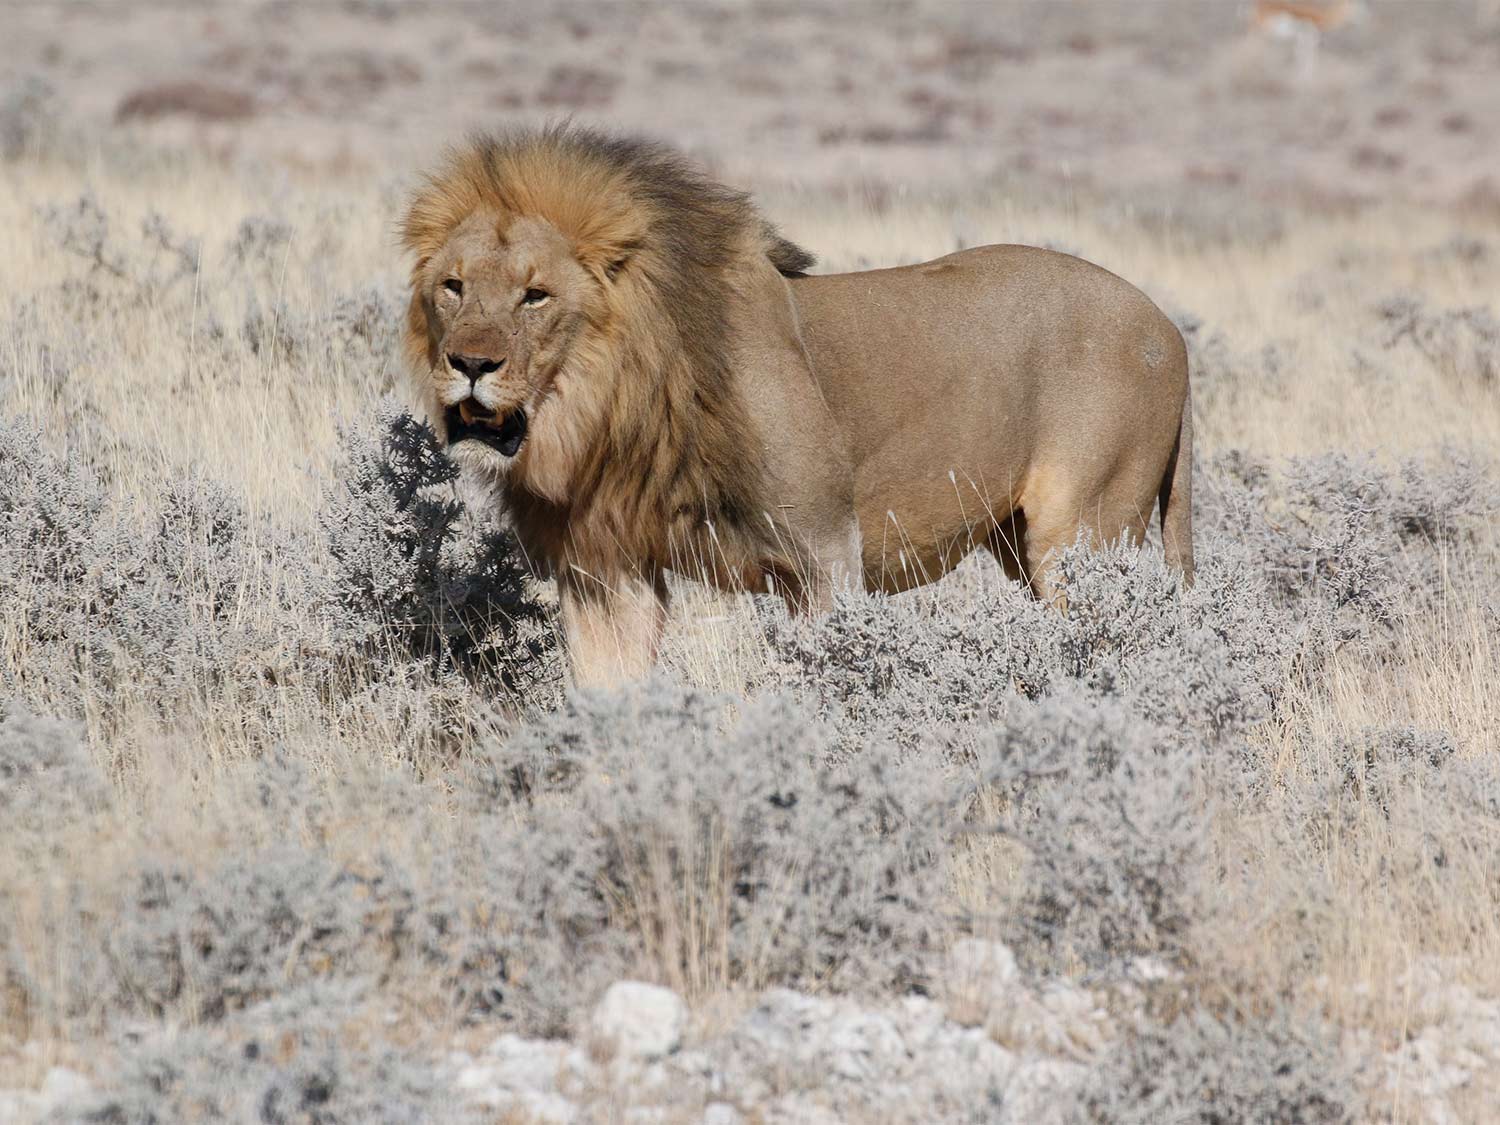 A male lion in the tall grass of an African plain.